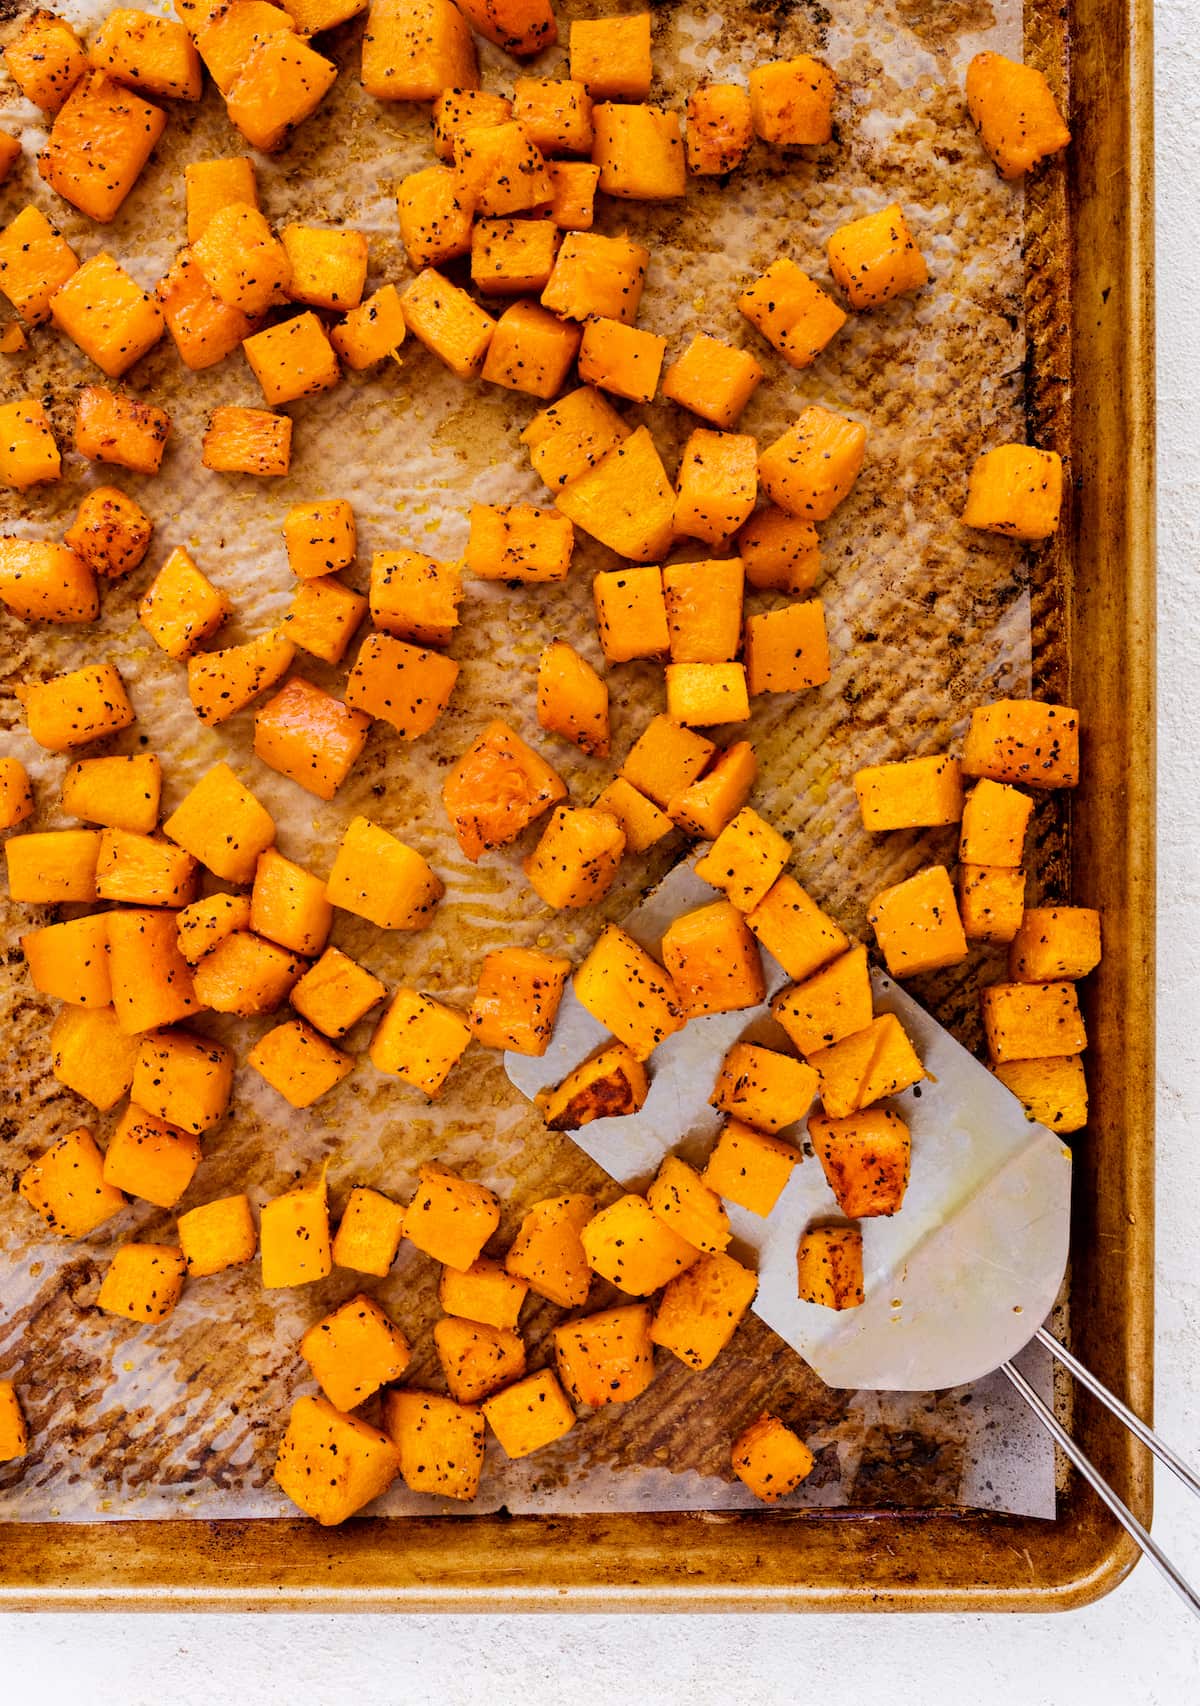 Seasoned and cubed roasted butternut squash on a baking tray with a metal spatula.